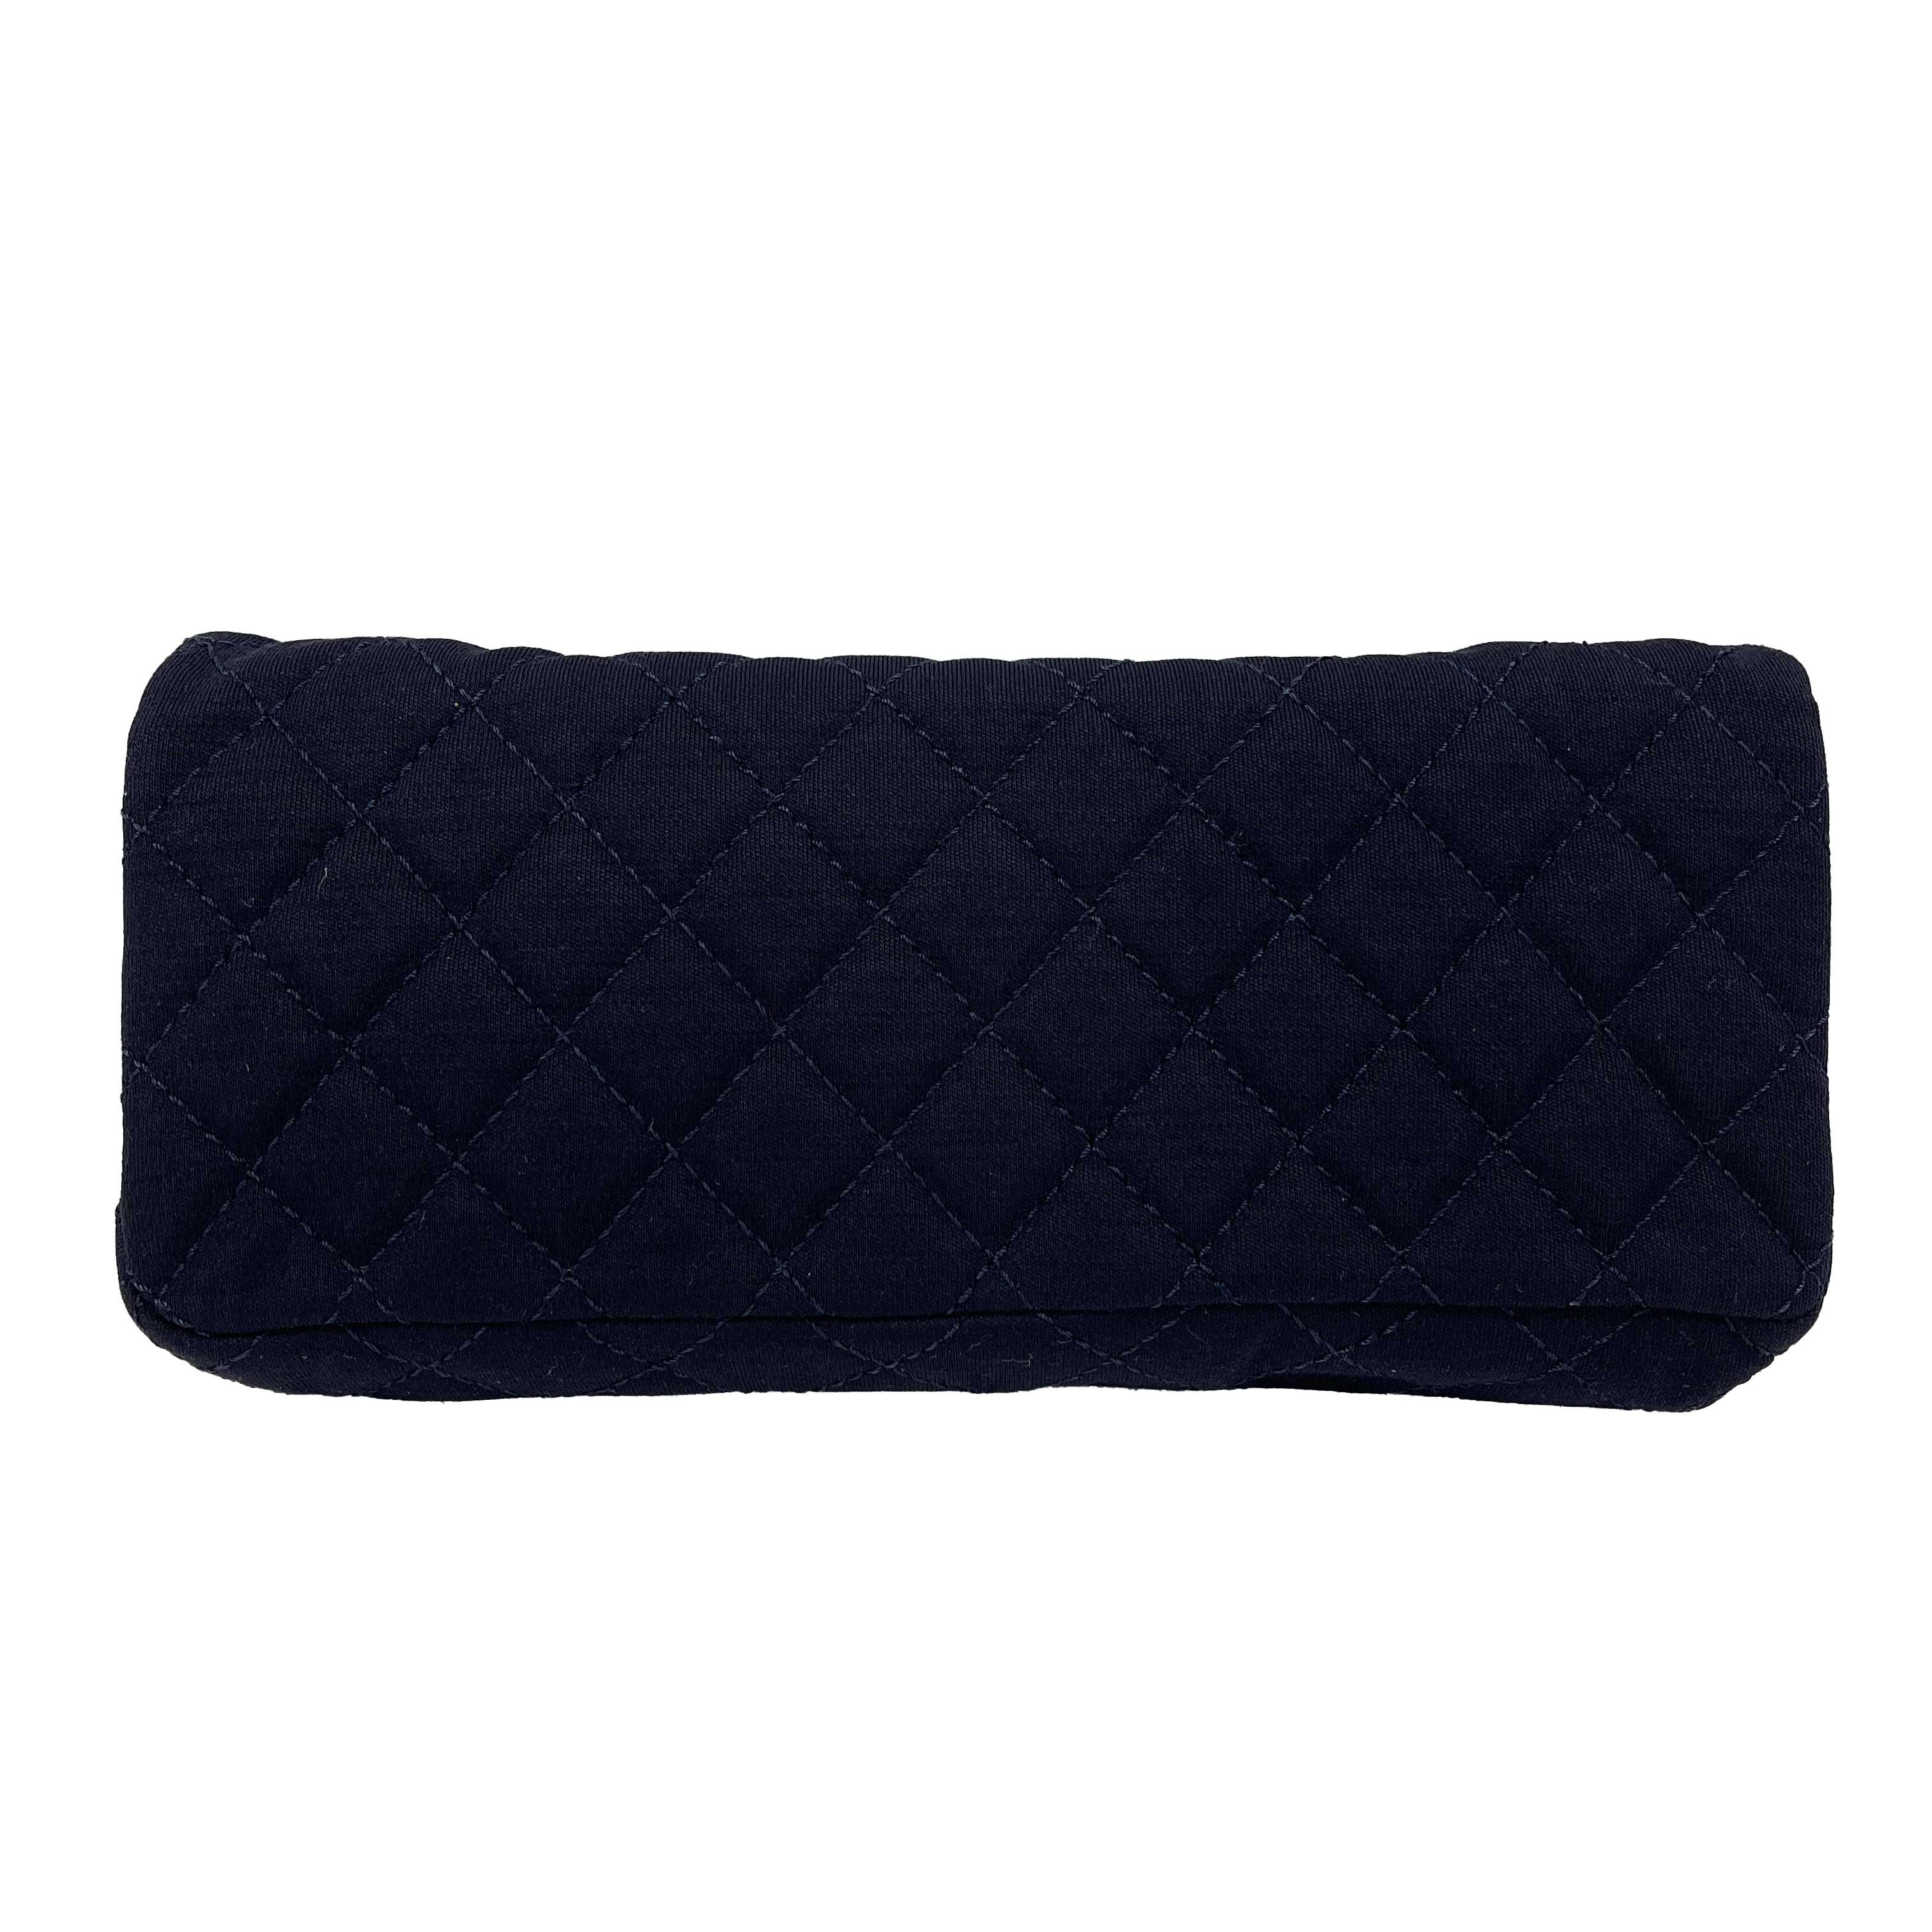 CHANEL - Excellent - 2008 Paris London Union Jack Flap  Clutch Shoulder - Navy Blue - Handbag

Description

Pre-Fall 2008 Collection.
This limited edition clutch can also be worn as a shoulder bag.
Features, navy quilted canvas with a box chain long